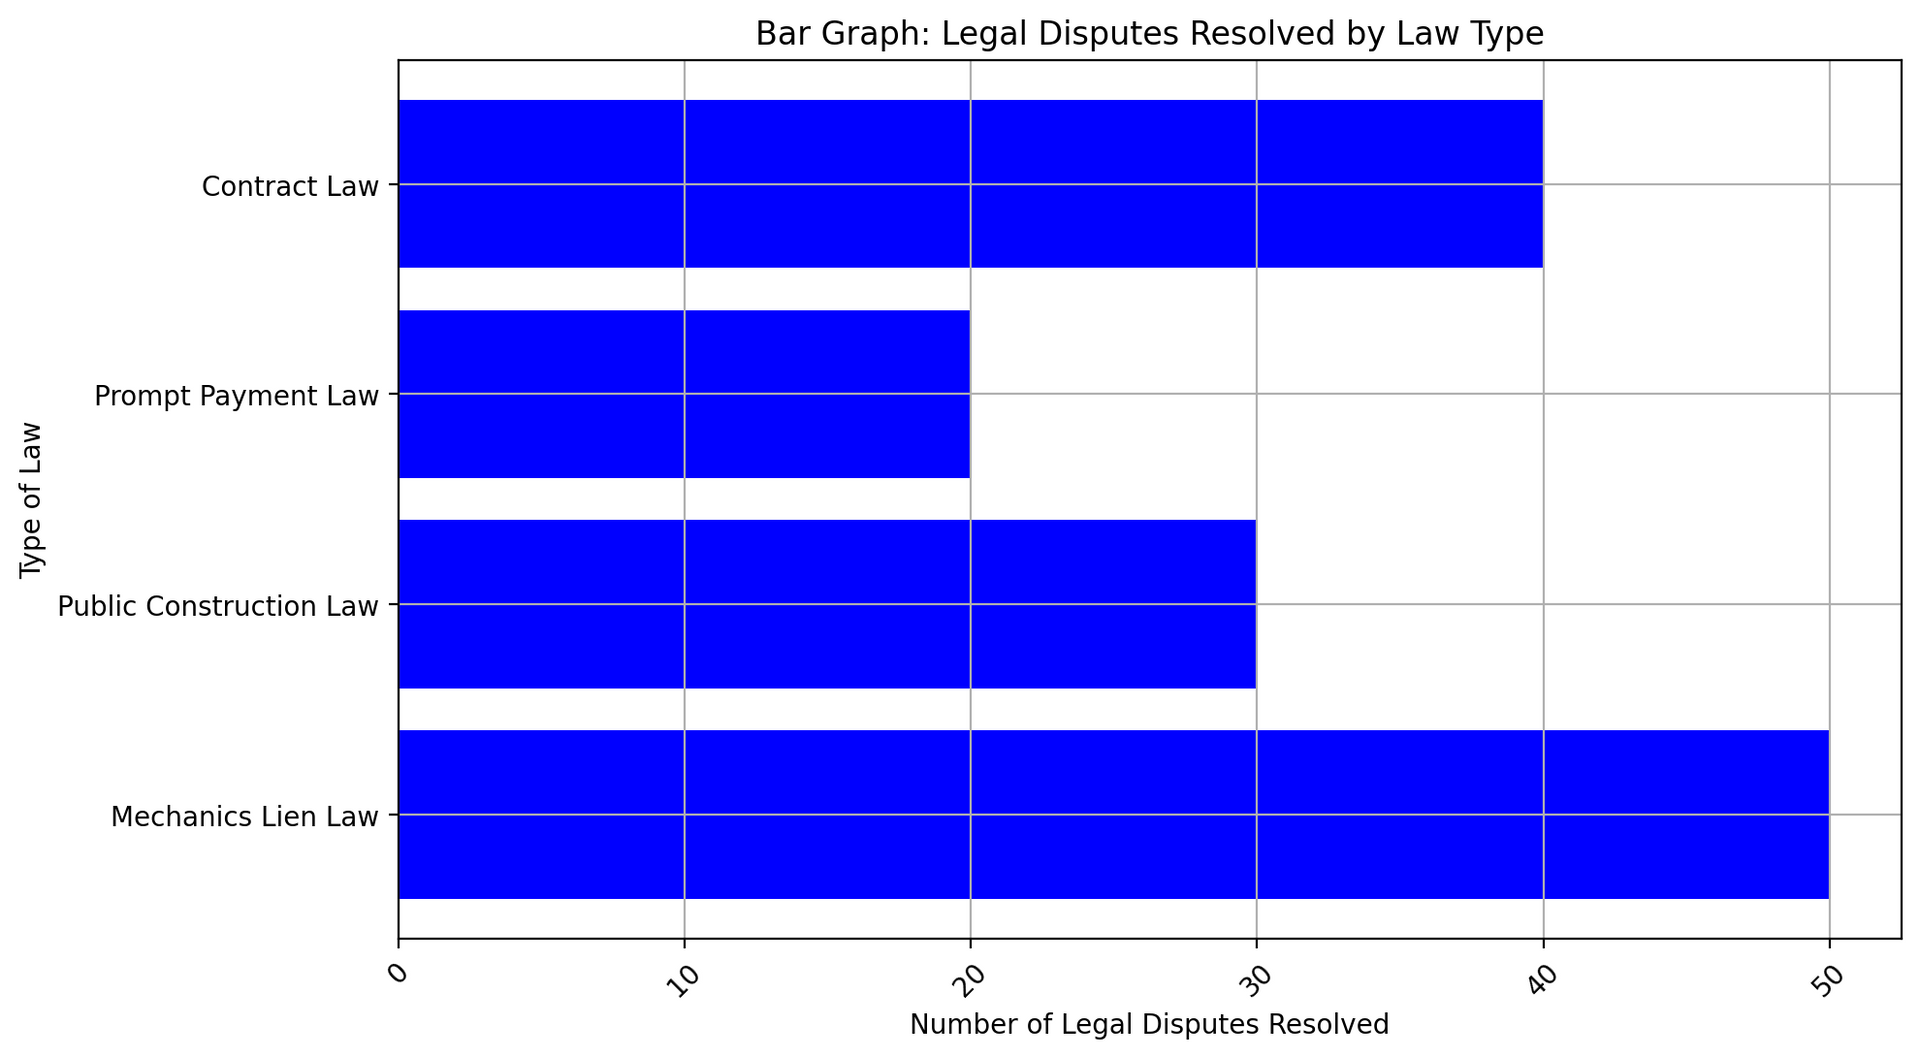 A bar graph displaying the number of legal disputes resolved under each type of law for better understanding of which legal avenues are most effective.